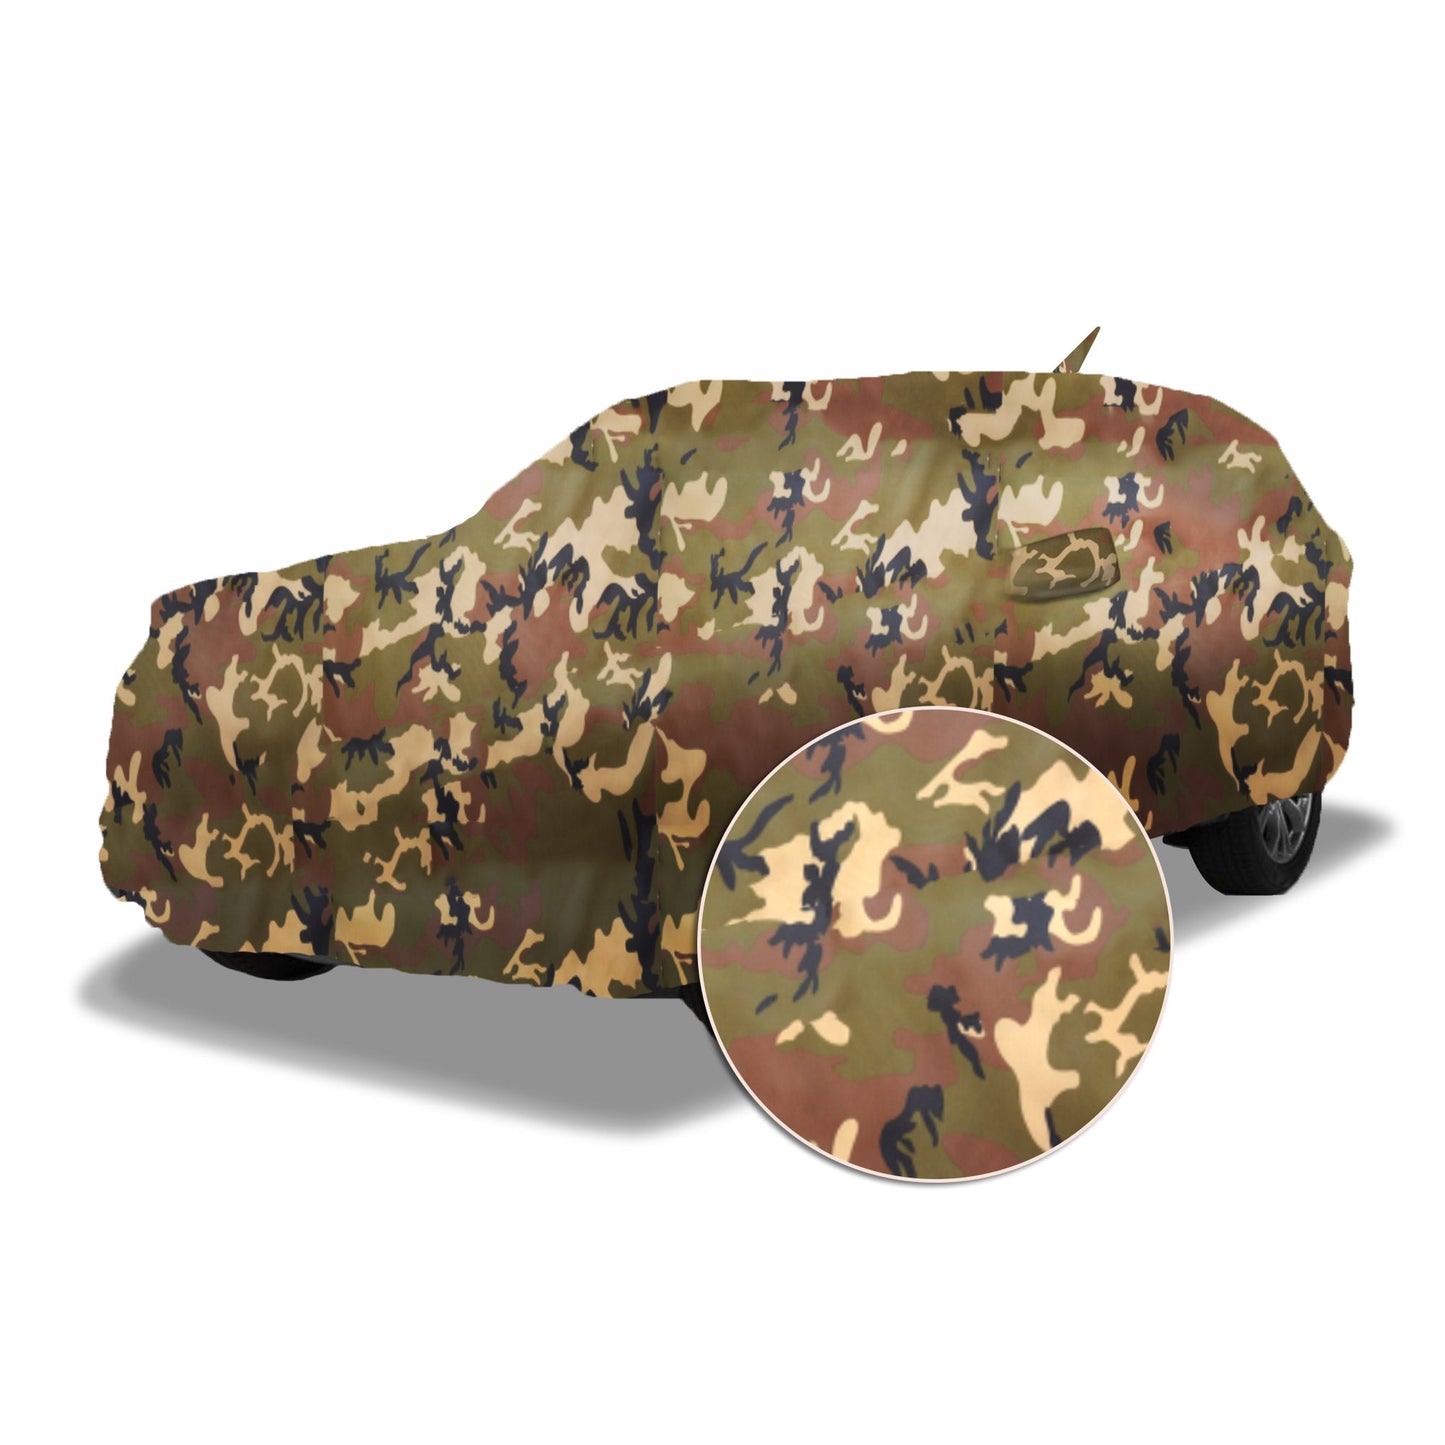 Ascot Hyundai Santro Car Body Cover 2018-2023 Model Extra Strong & Dust Proof Jungle Military Car Cover with UV Proof & Water-Resistant Coating